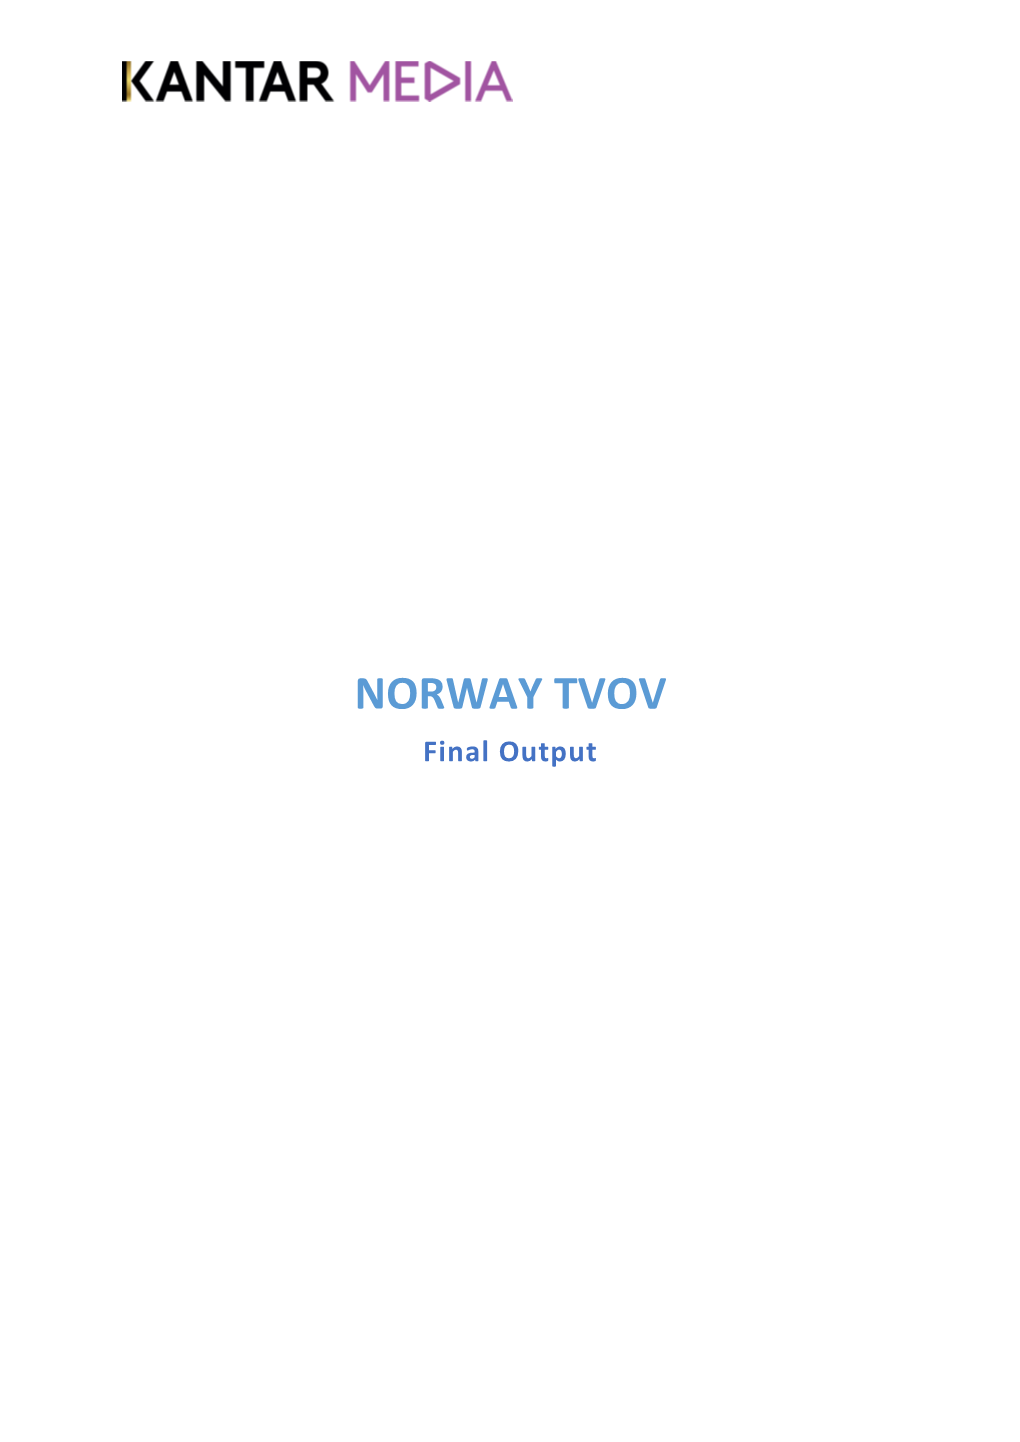 NORWAY TVOV Final Output